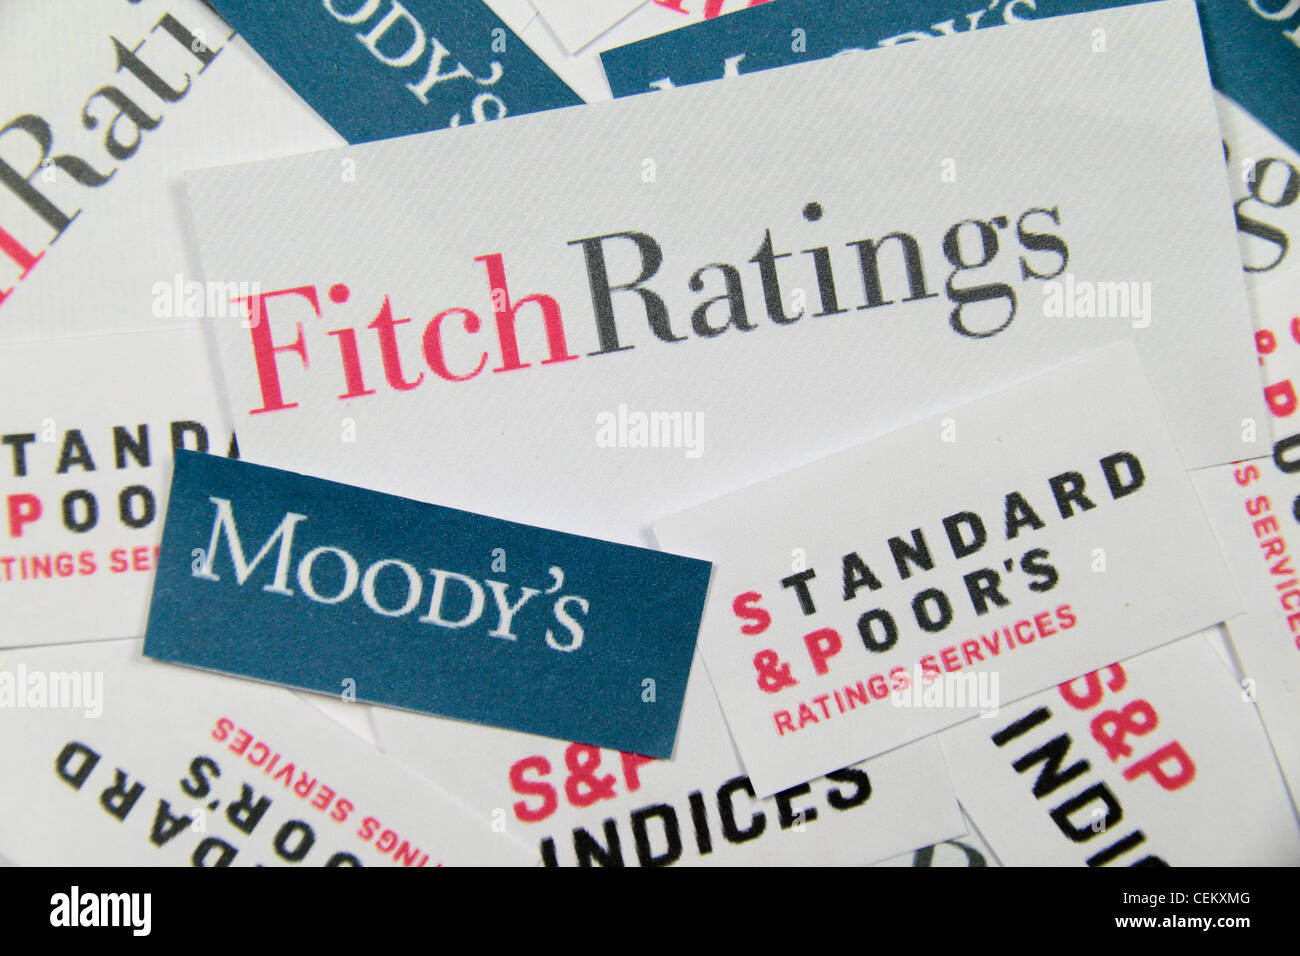 The logos of Fitch Ratings, Moody's and Standard & Poor's, the world's primary credit rating agencies. Stock Photo